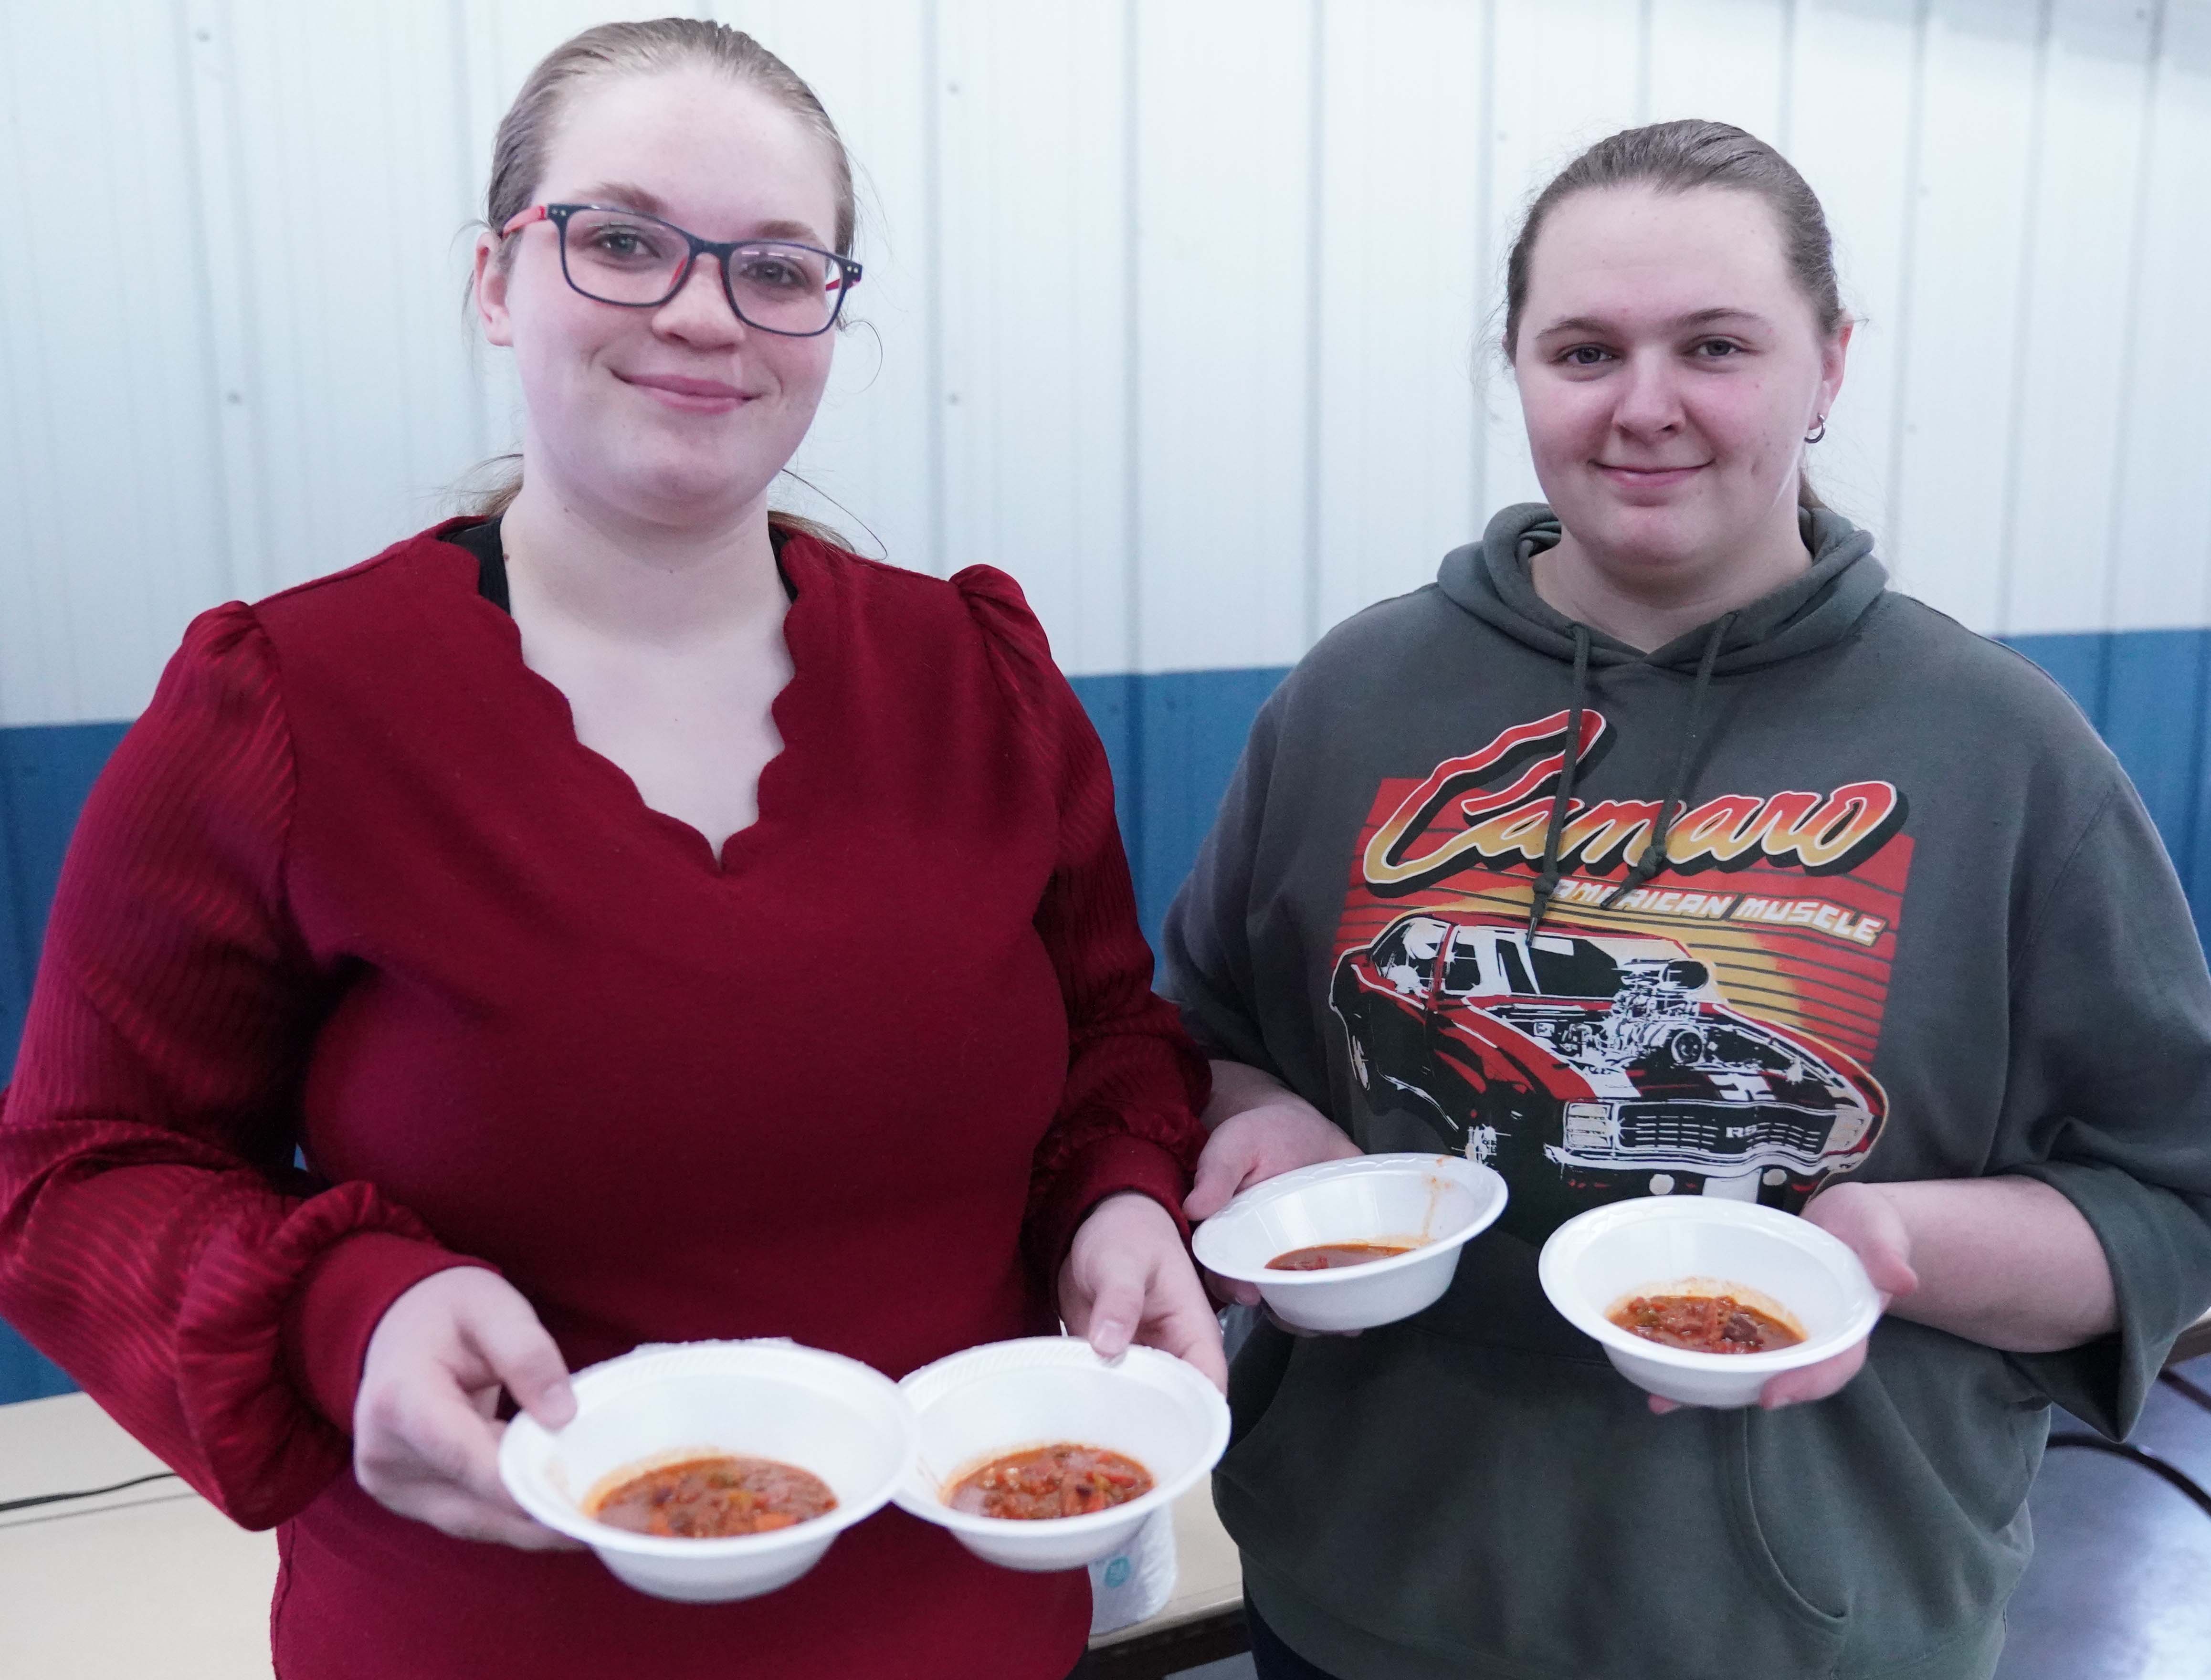 McCook Community College music students Paige Bopp (left) and Izabella Schmidt helped serve up bowls of chili at the 22nd Annual Dick Driml Chili Cook-Off.